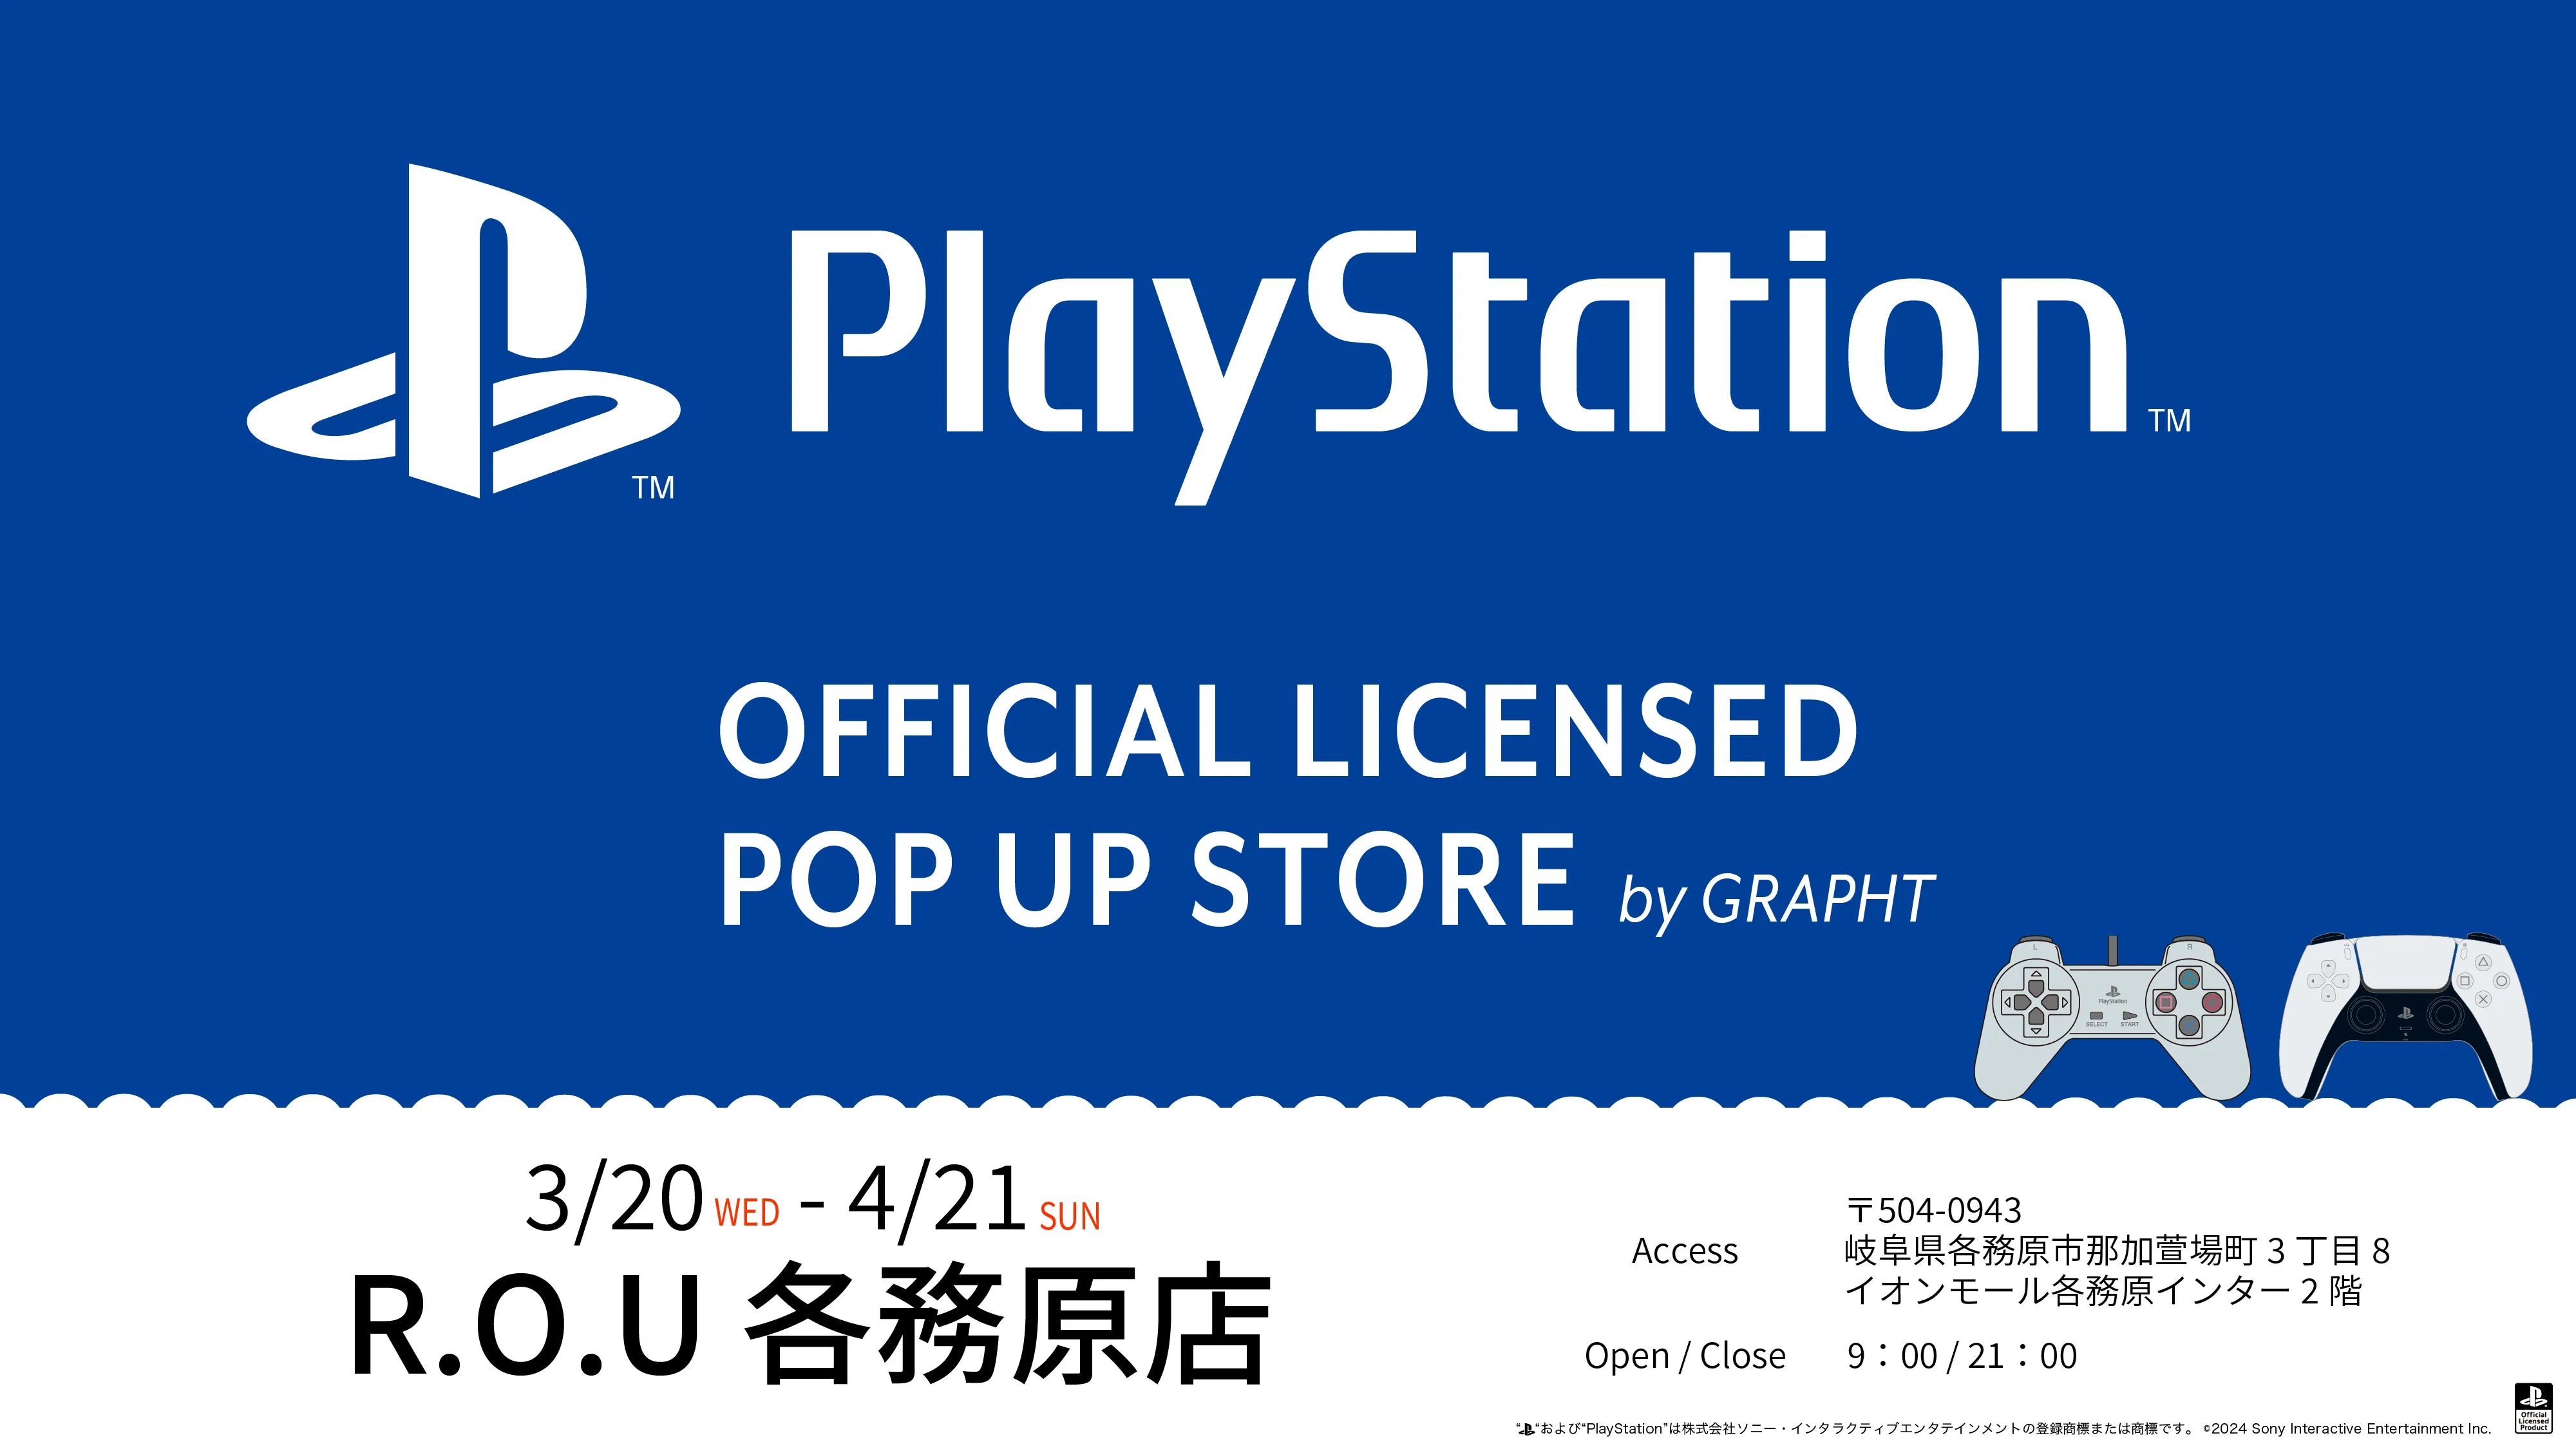 PlayStation™ Official Licensed POP UP STORE